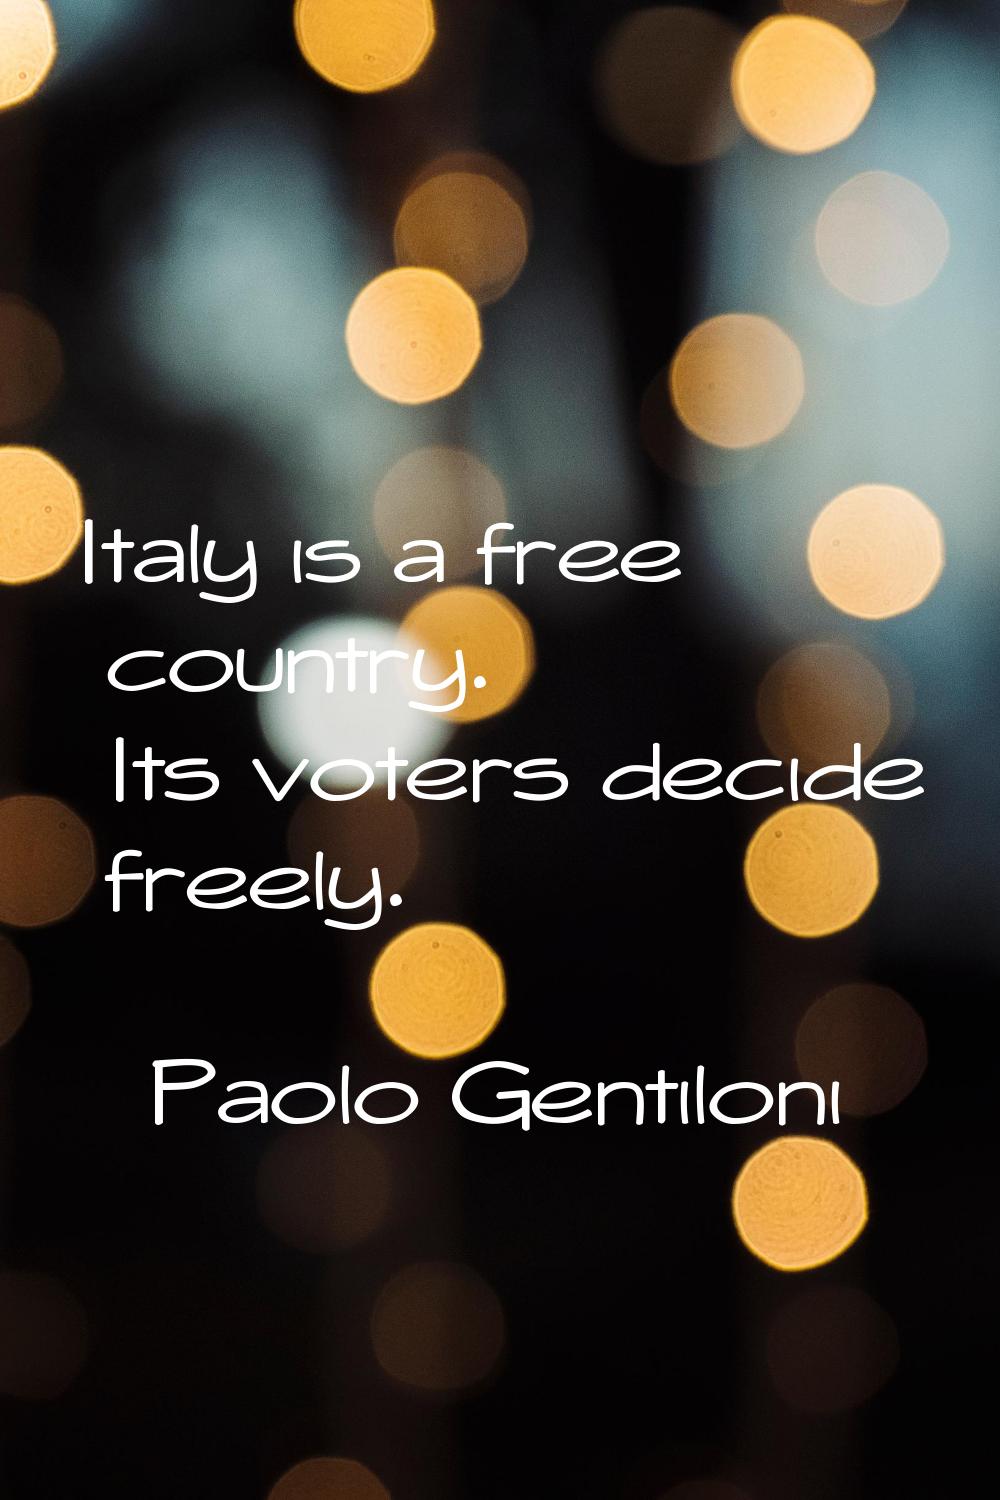 Italy is a free country. Its voters decide freely.